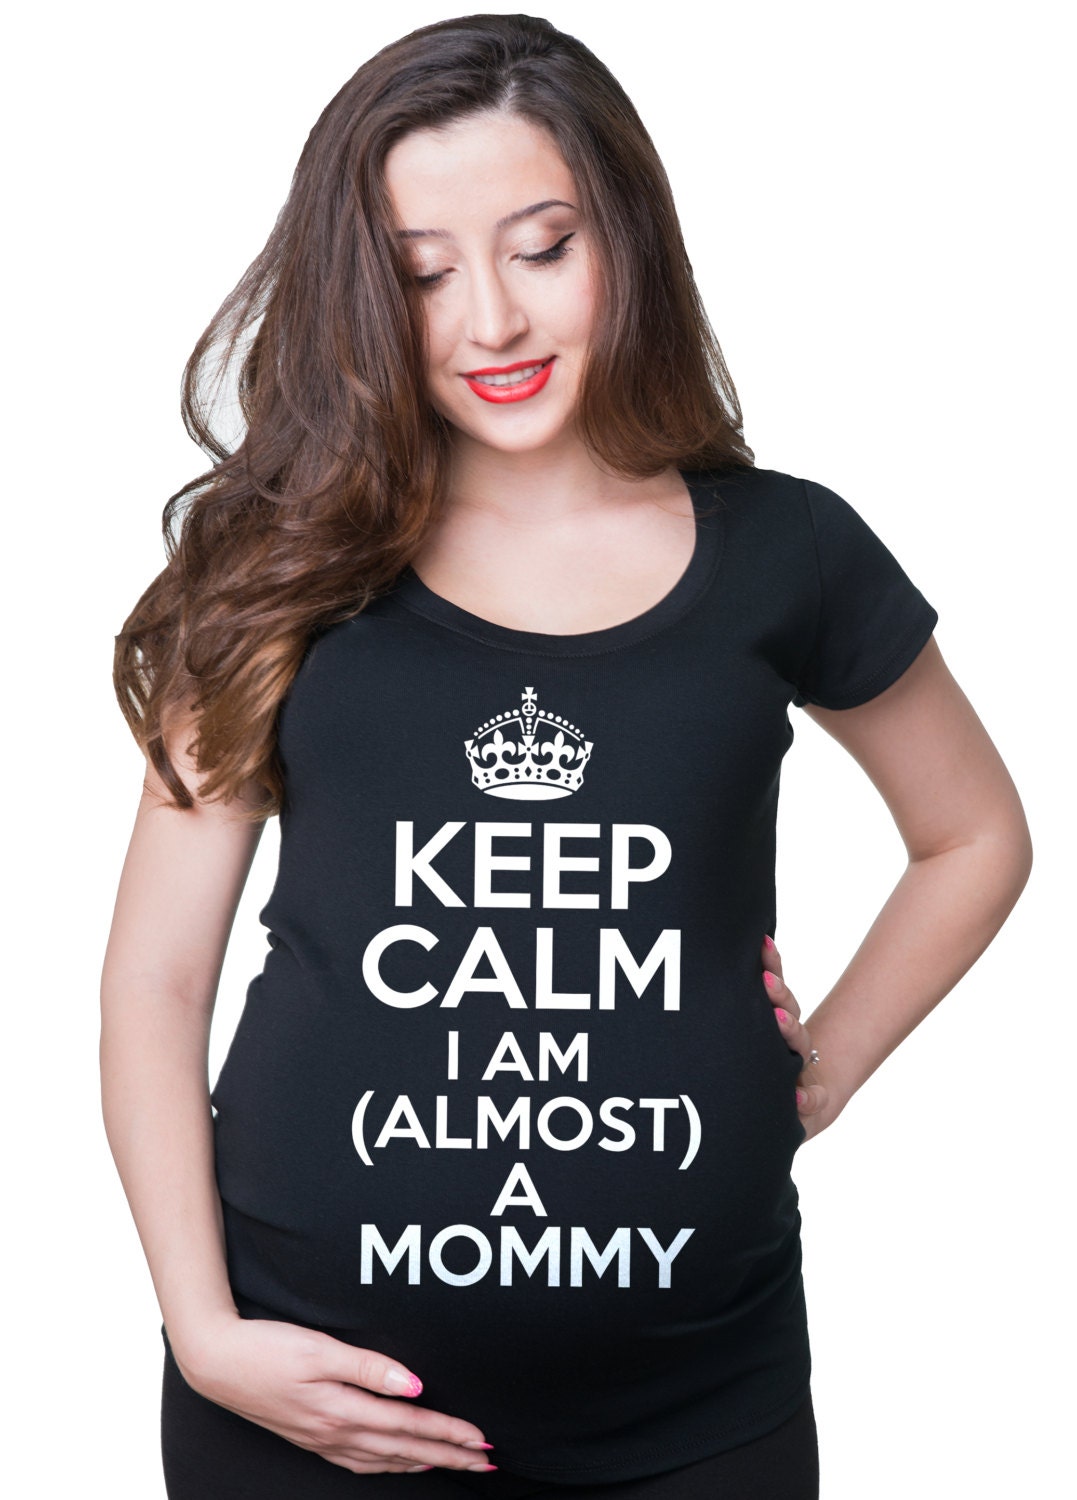 Keep Calm I Am ALMOST A Mommy T-Shirt Maternity Top Baby